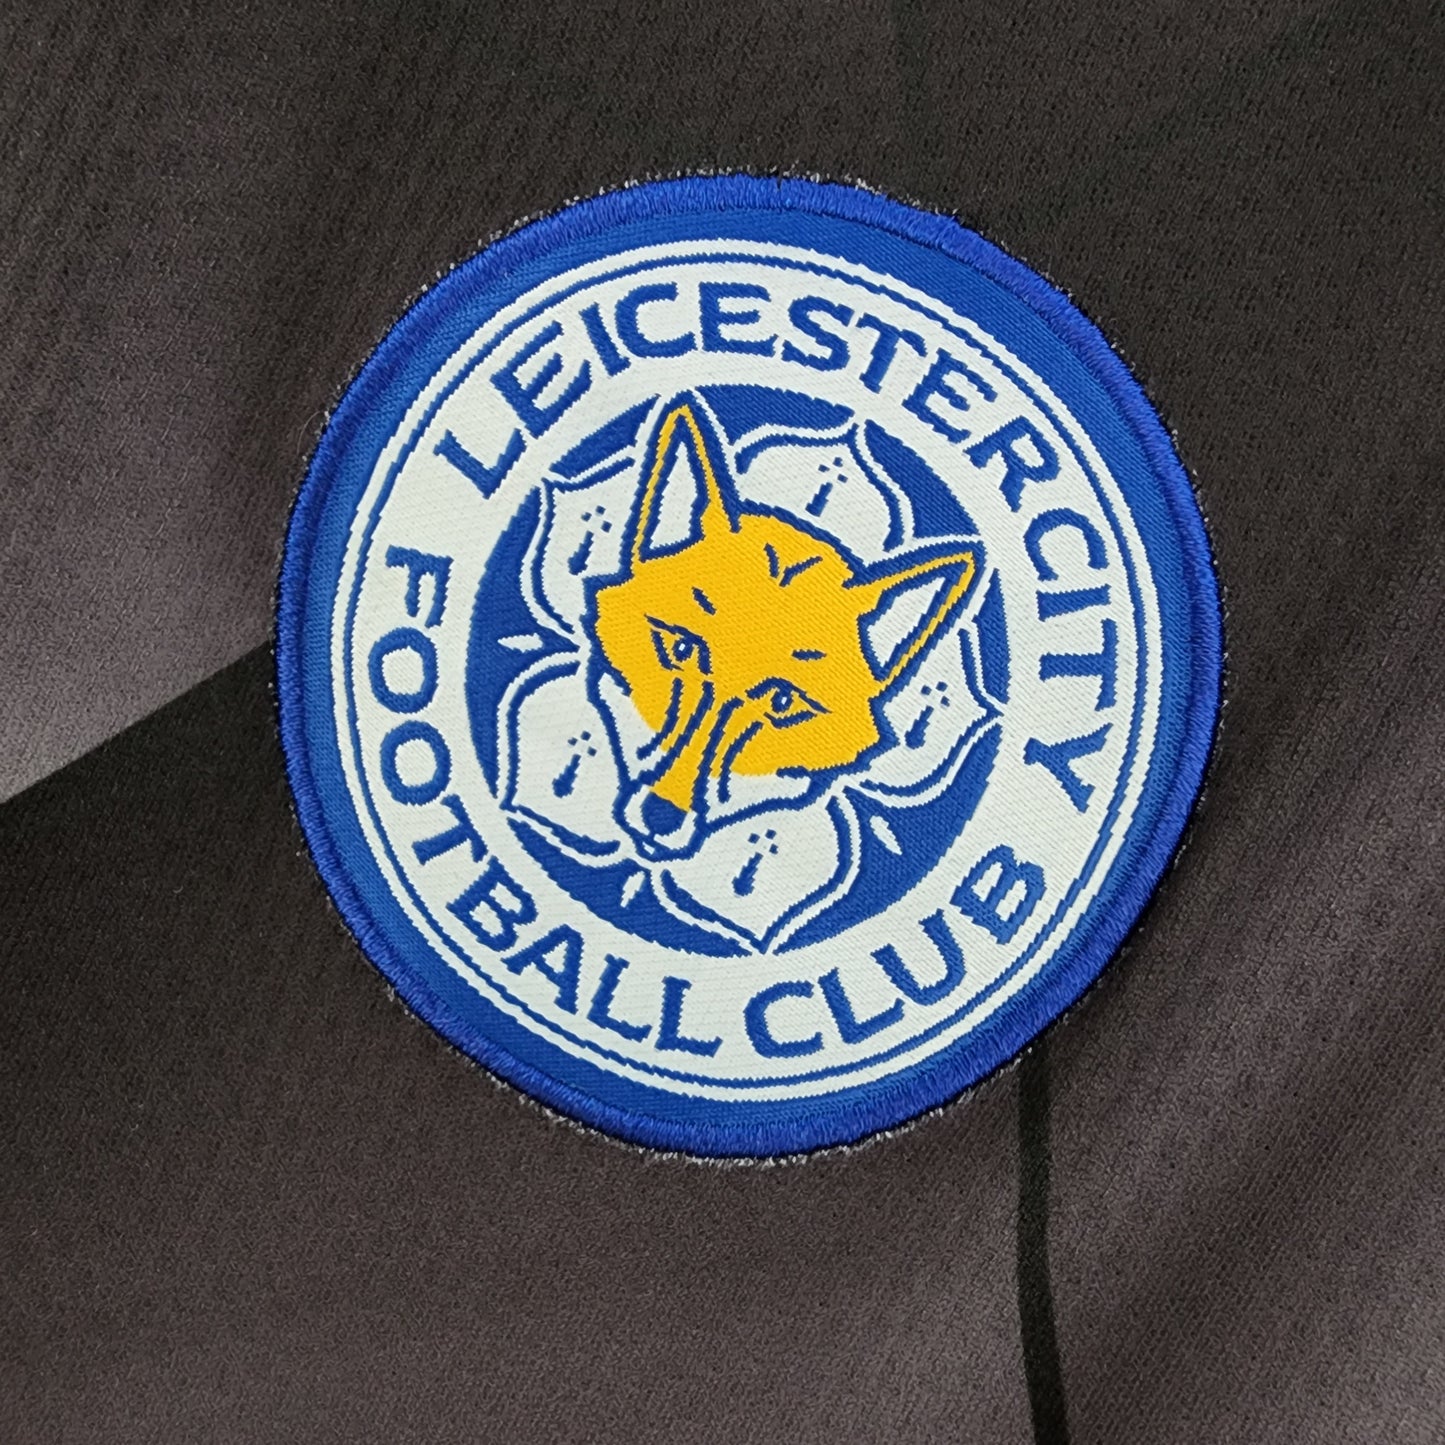 LEICESTER CITY 2015 - 2016 AWAY JERSEY